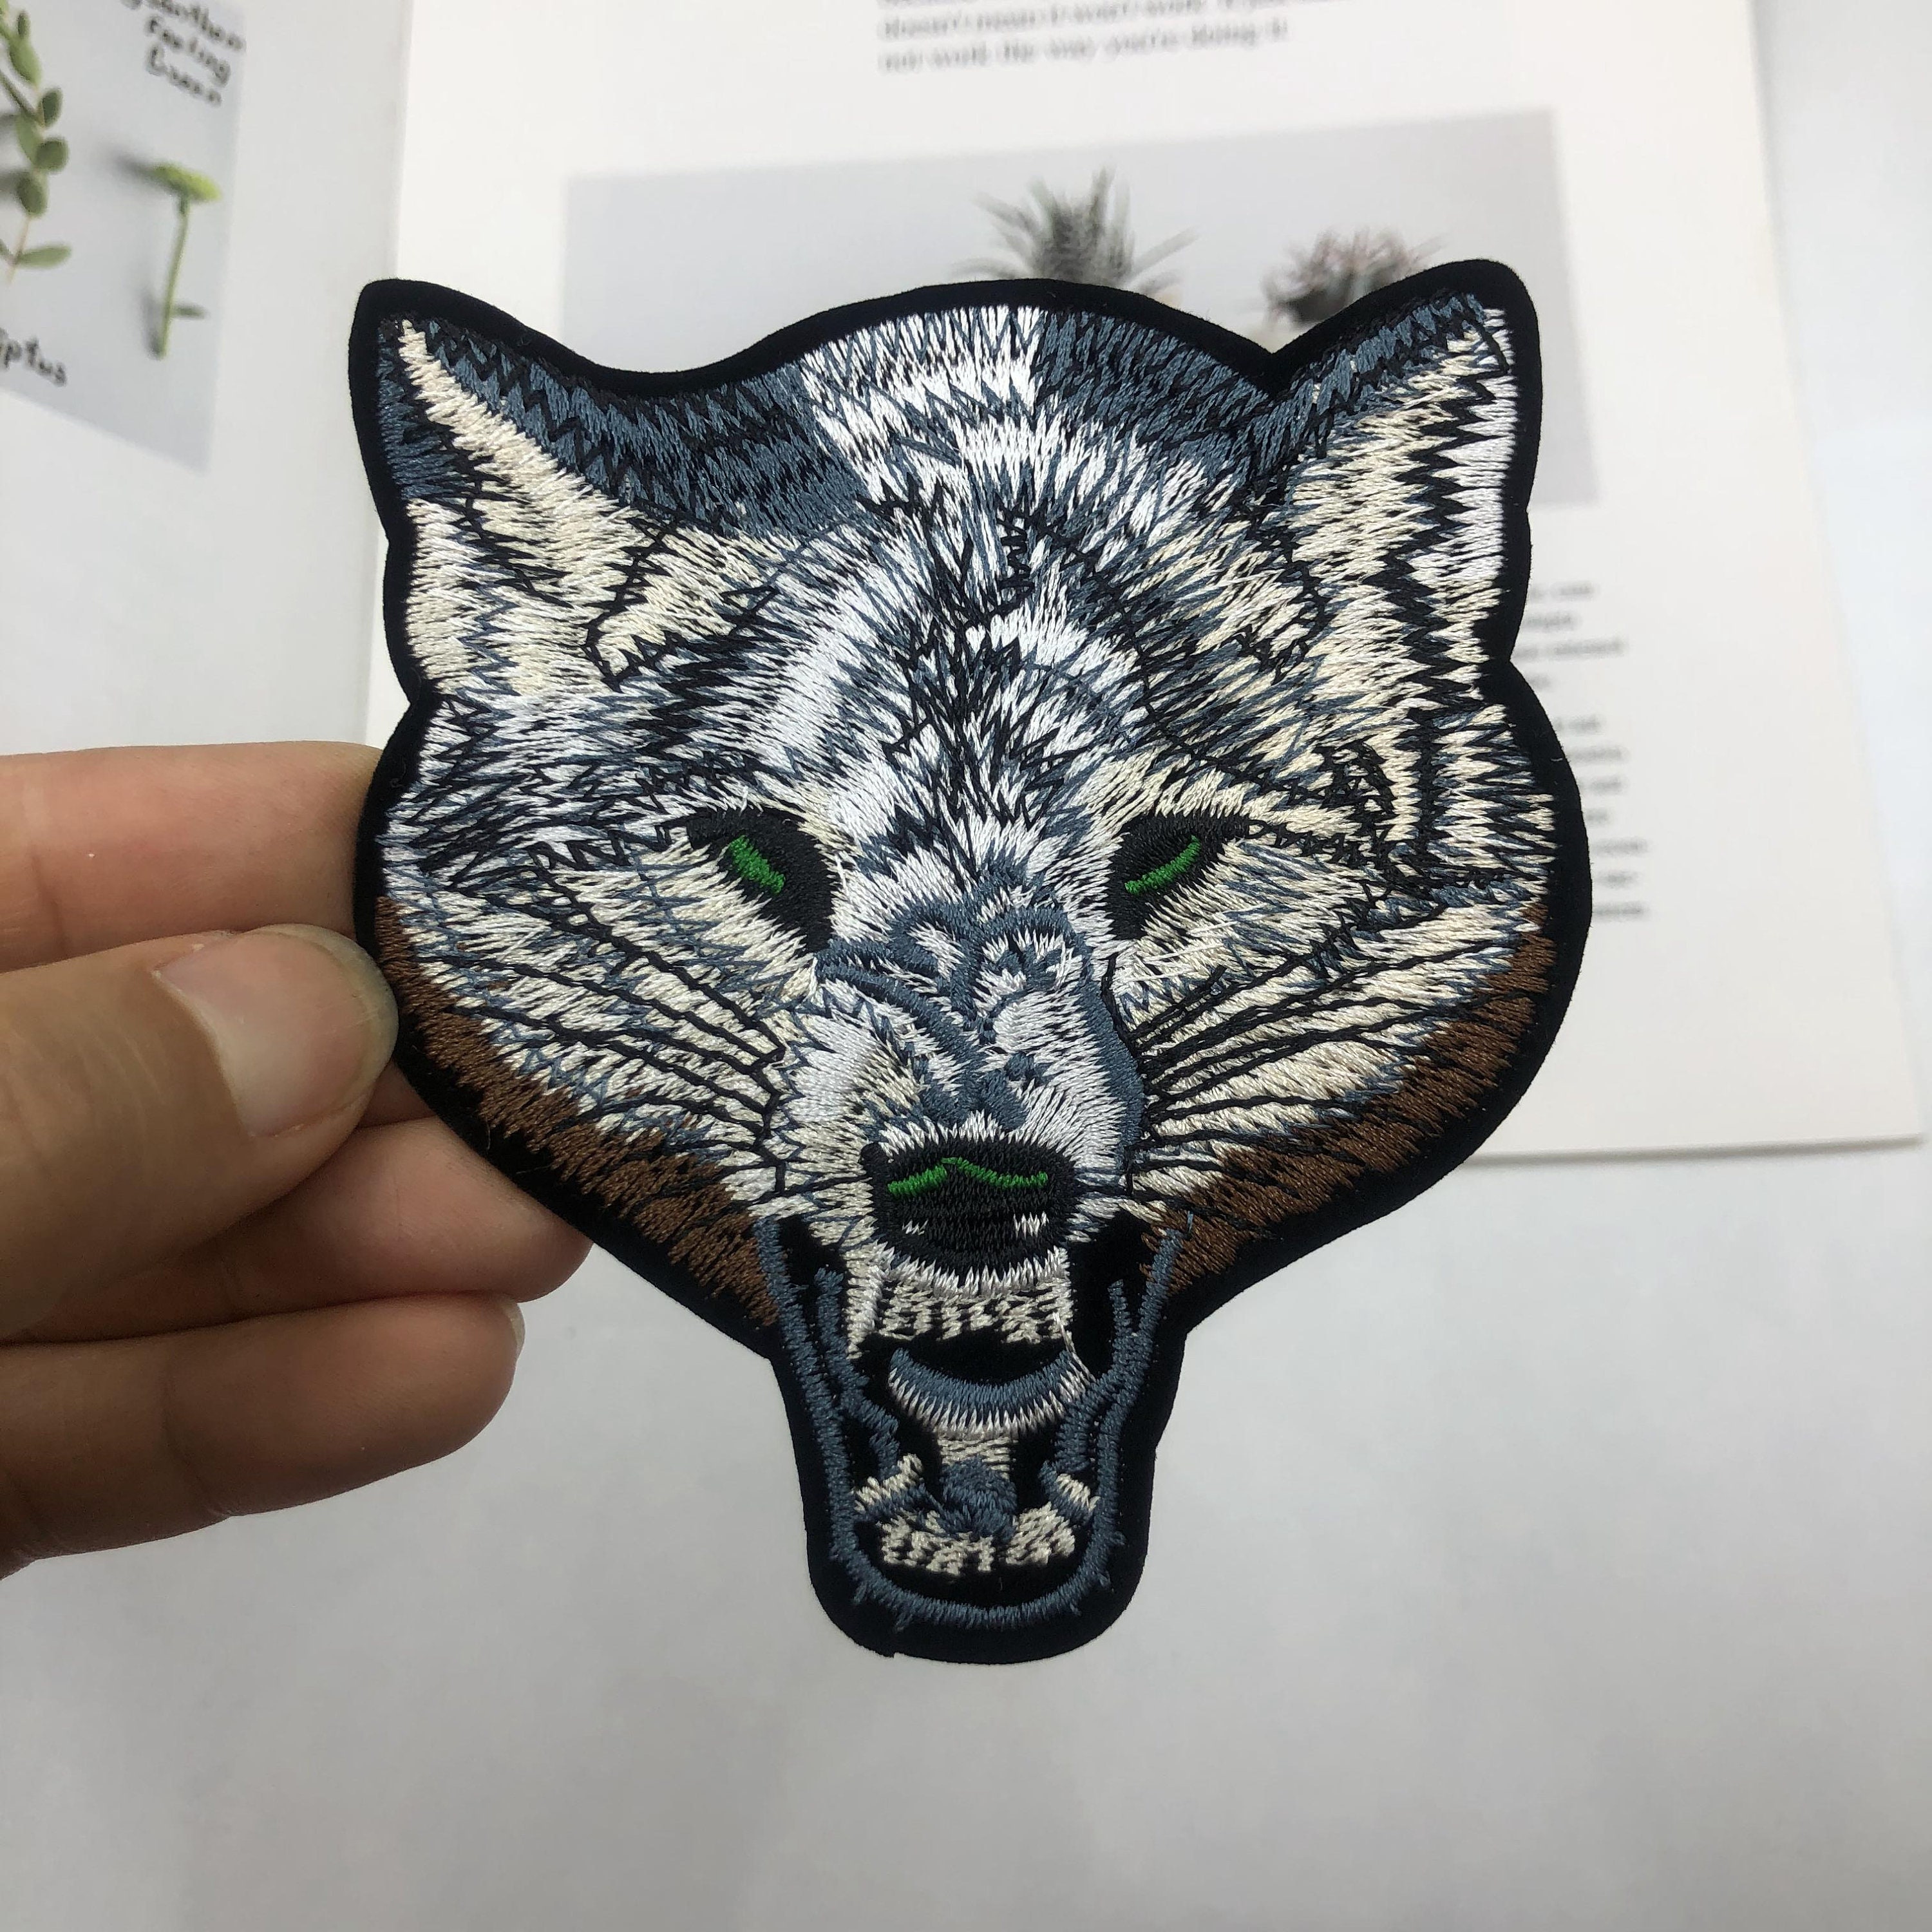 Scary Wolf Iron on Patch by Ivamis Patches